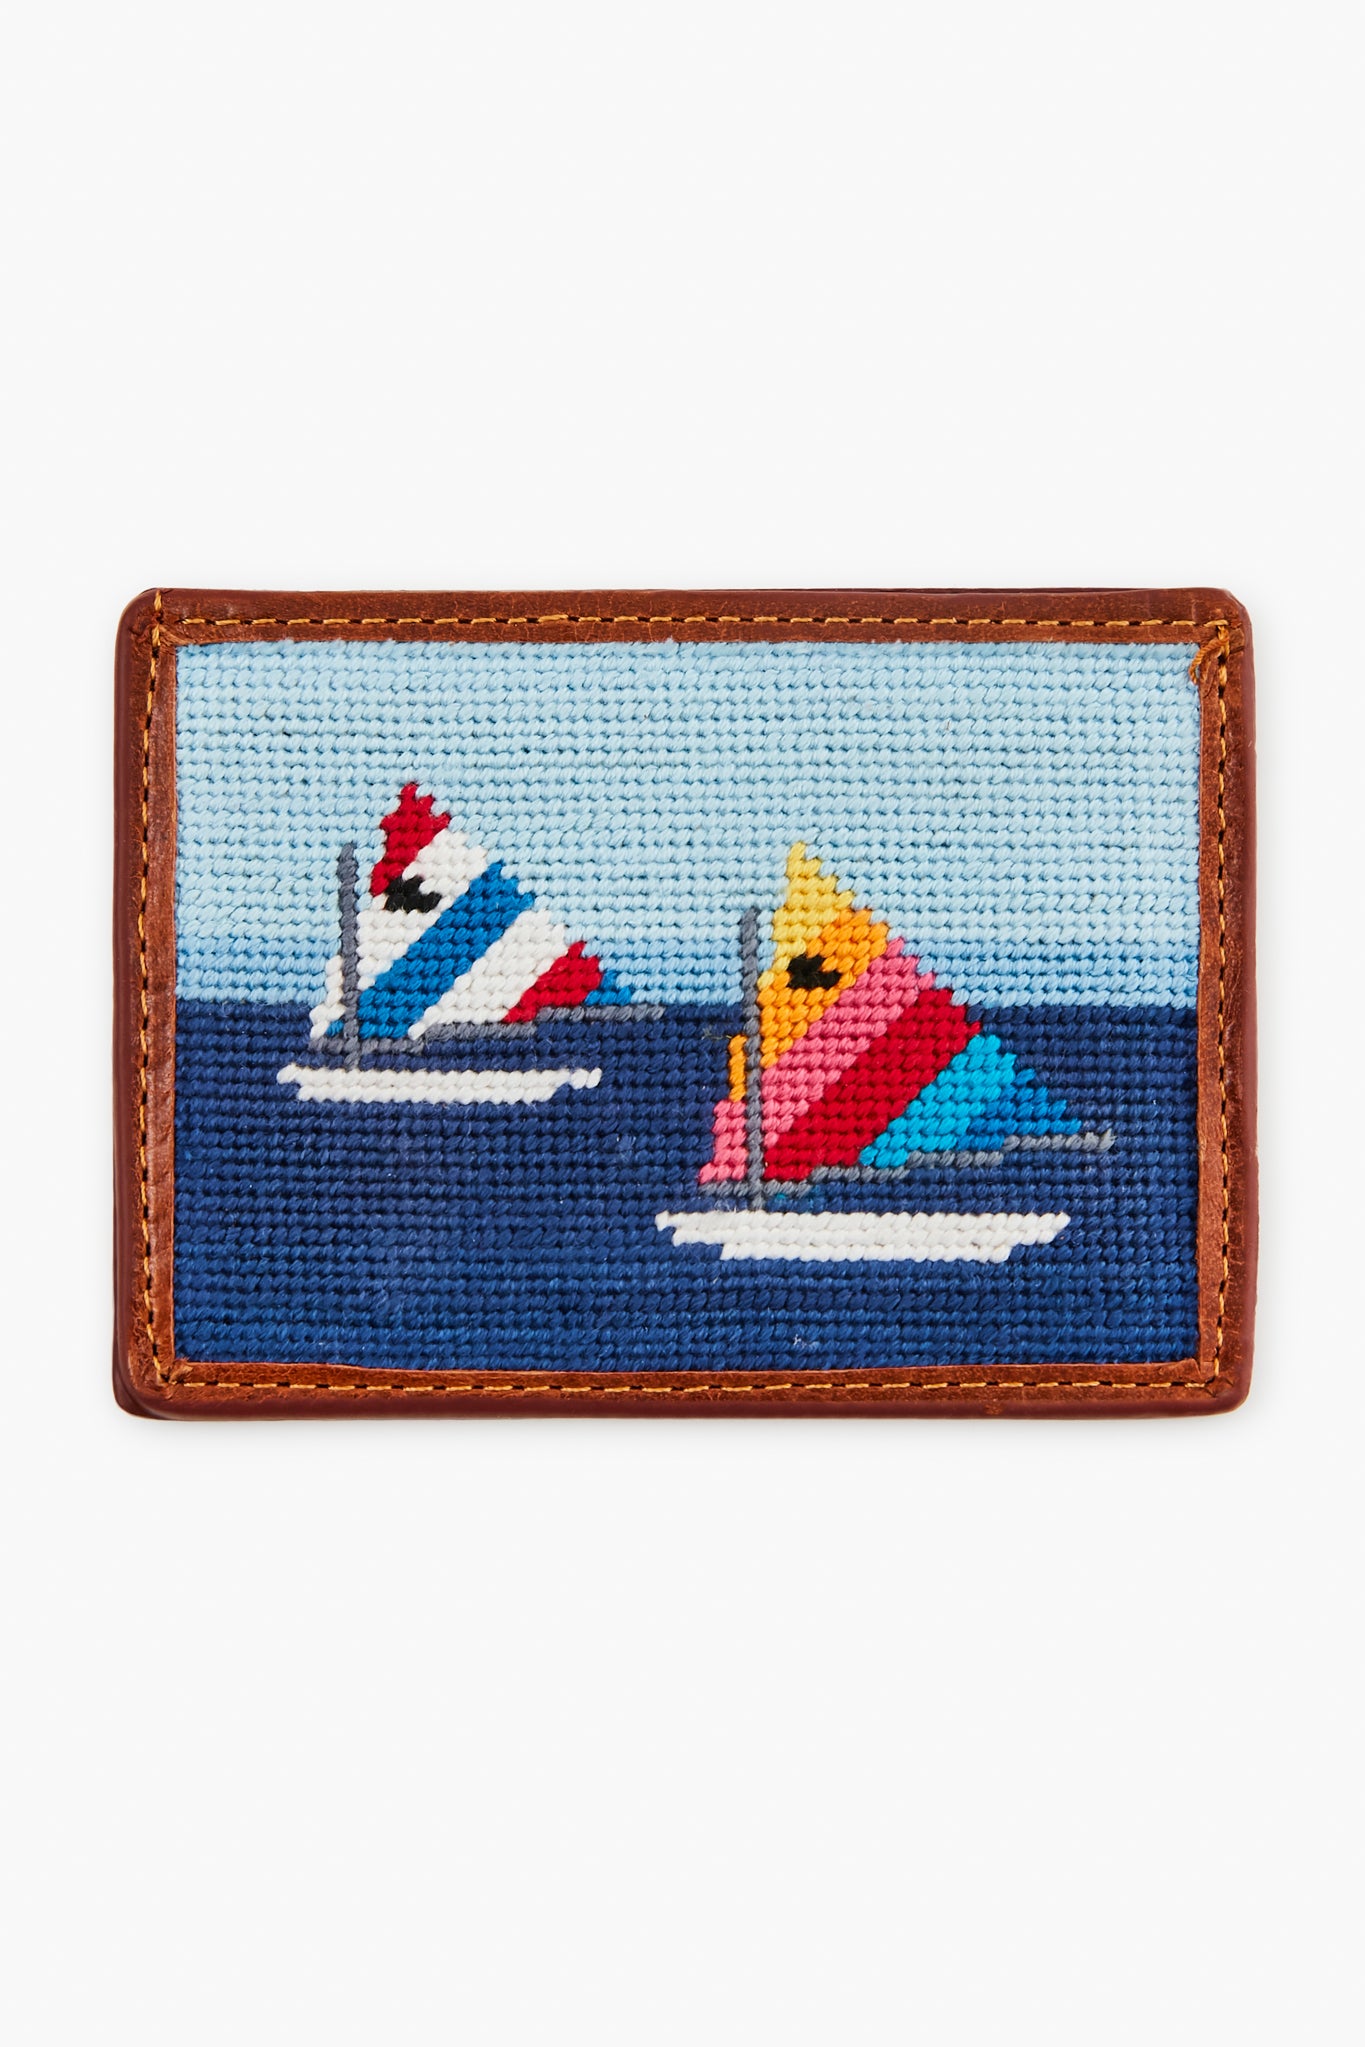 Fly Fishing Needlepoint Card Wallet Kit